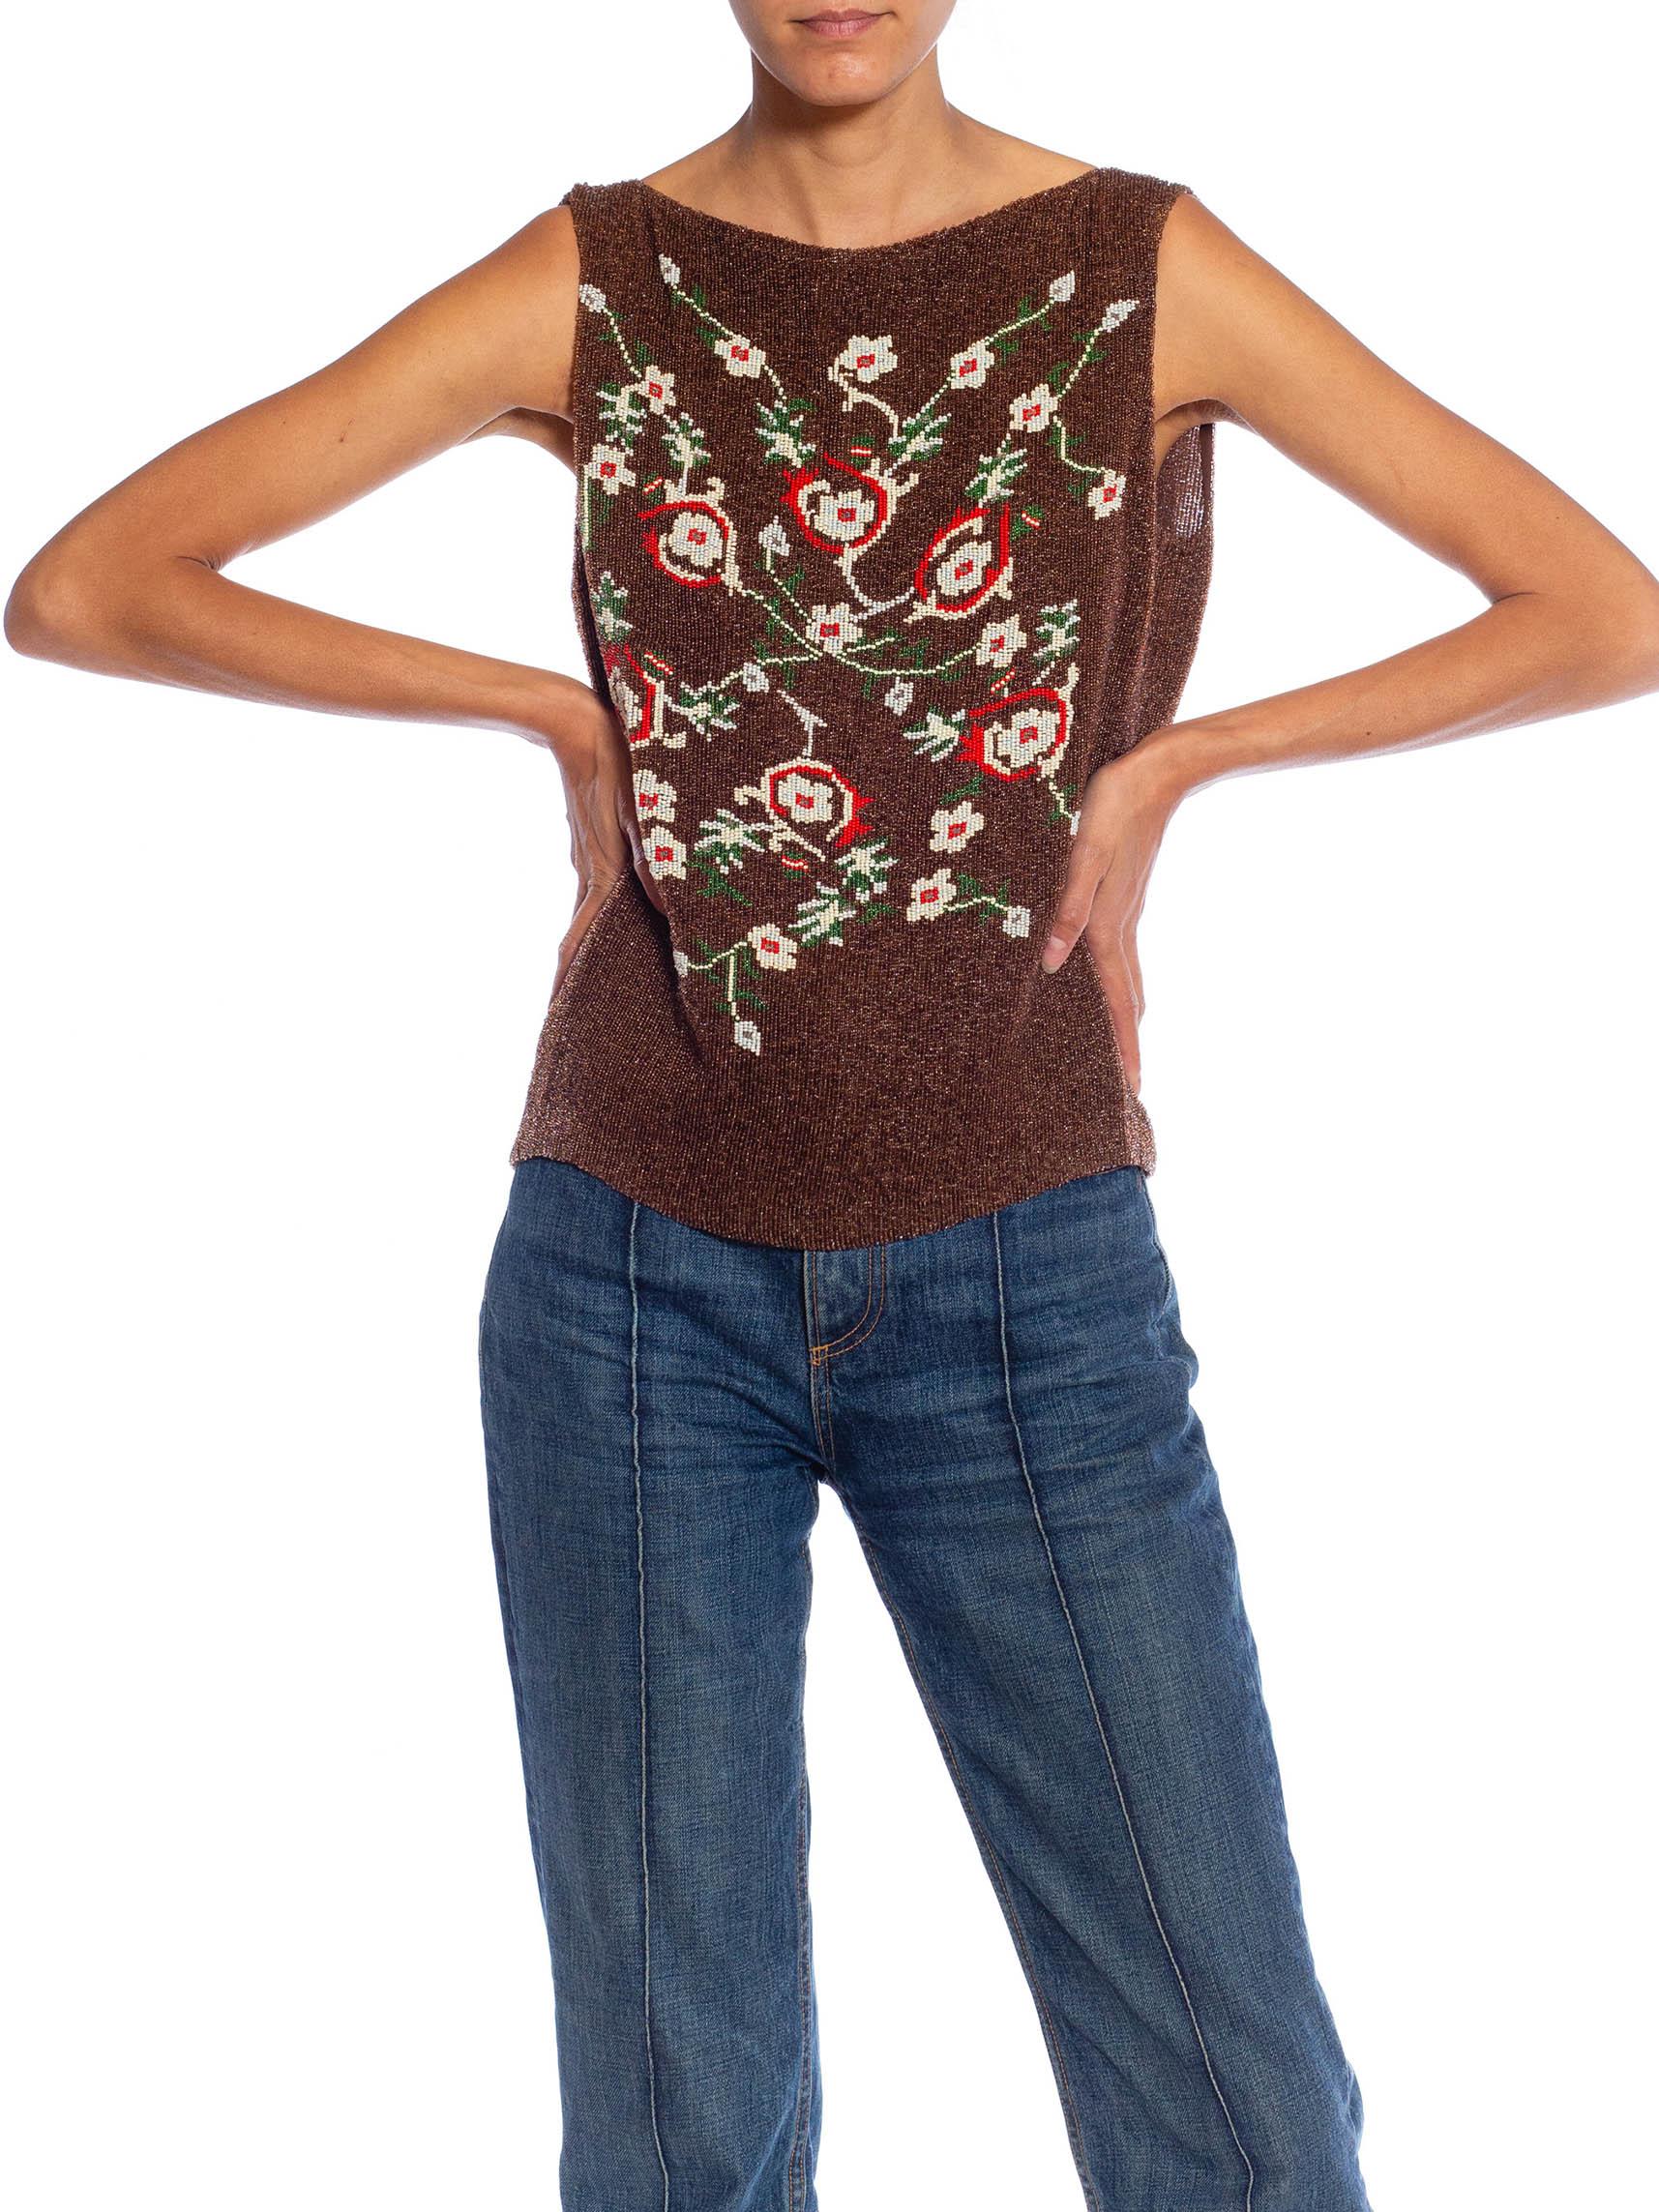 1990S Brown, Red & Green Floral Silk Beaded Top For Sale 1